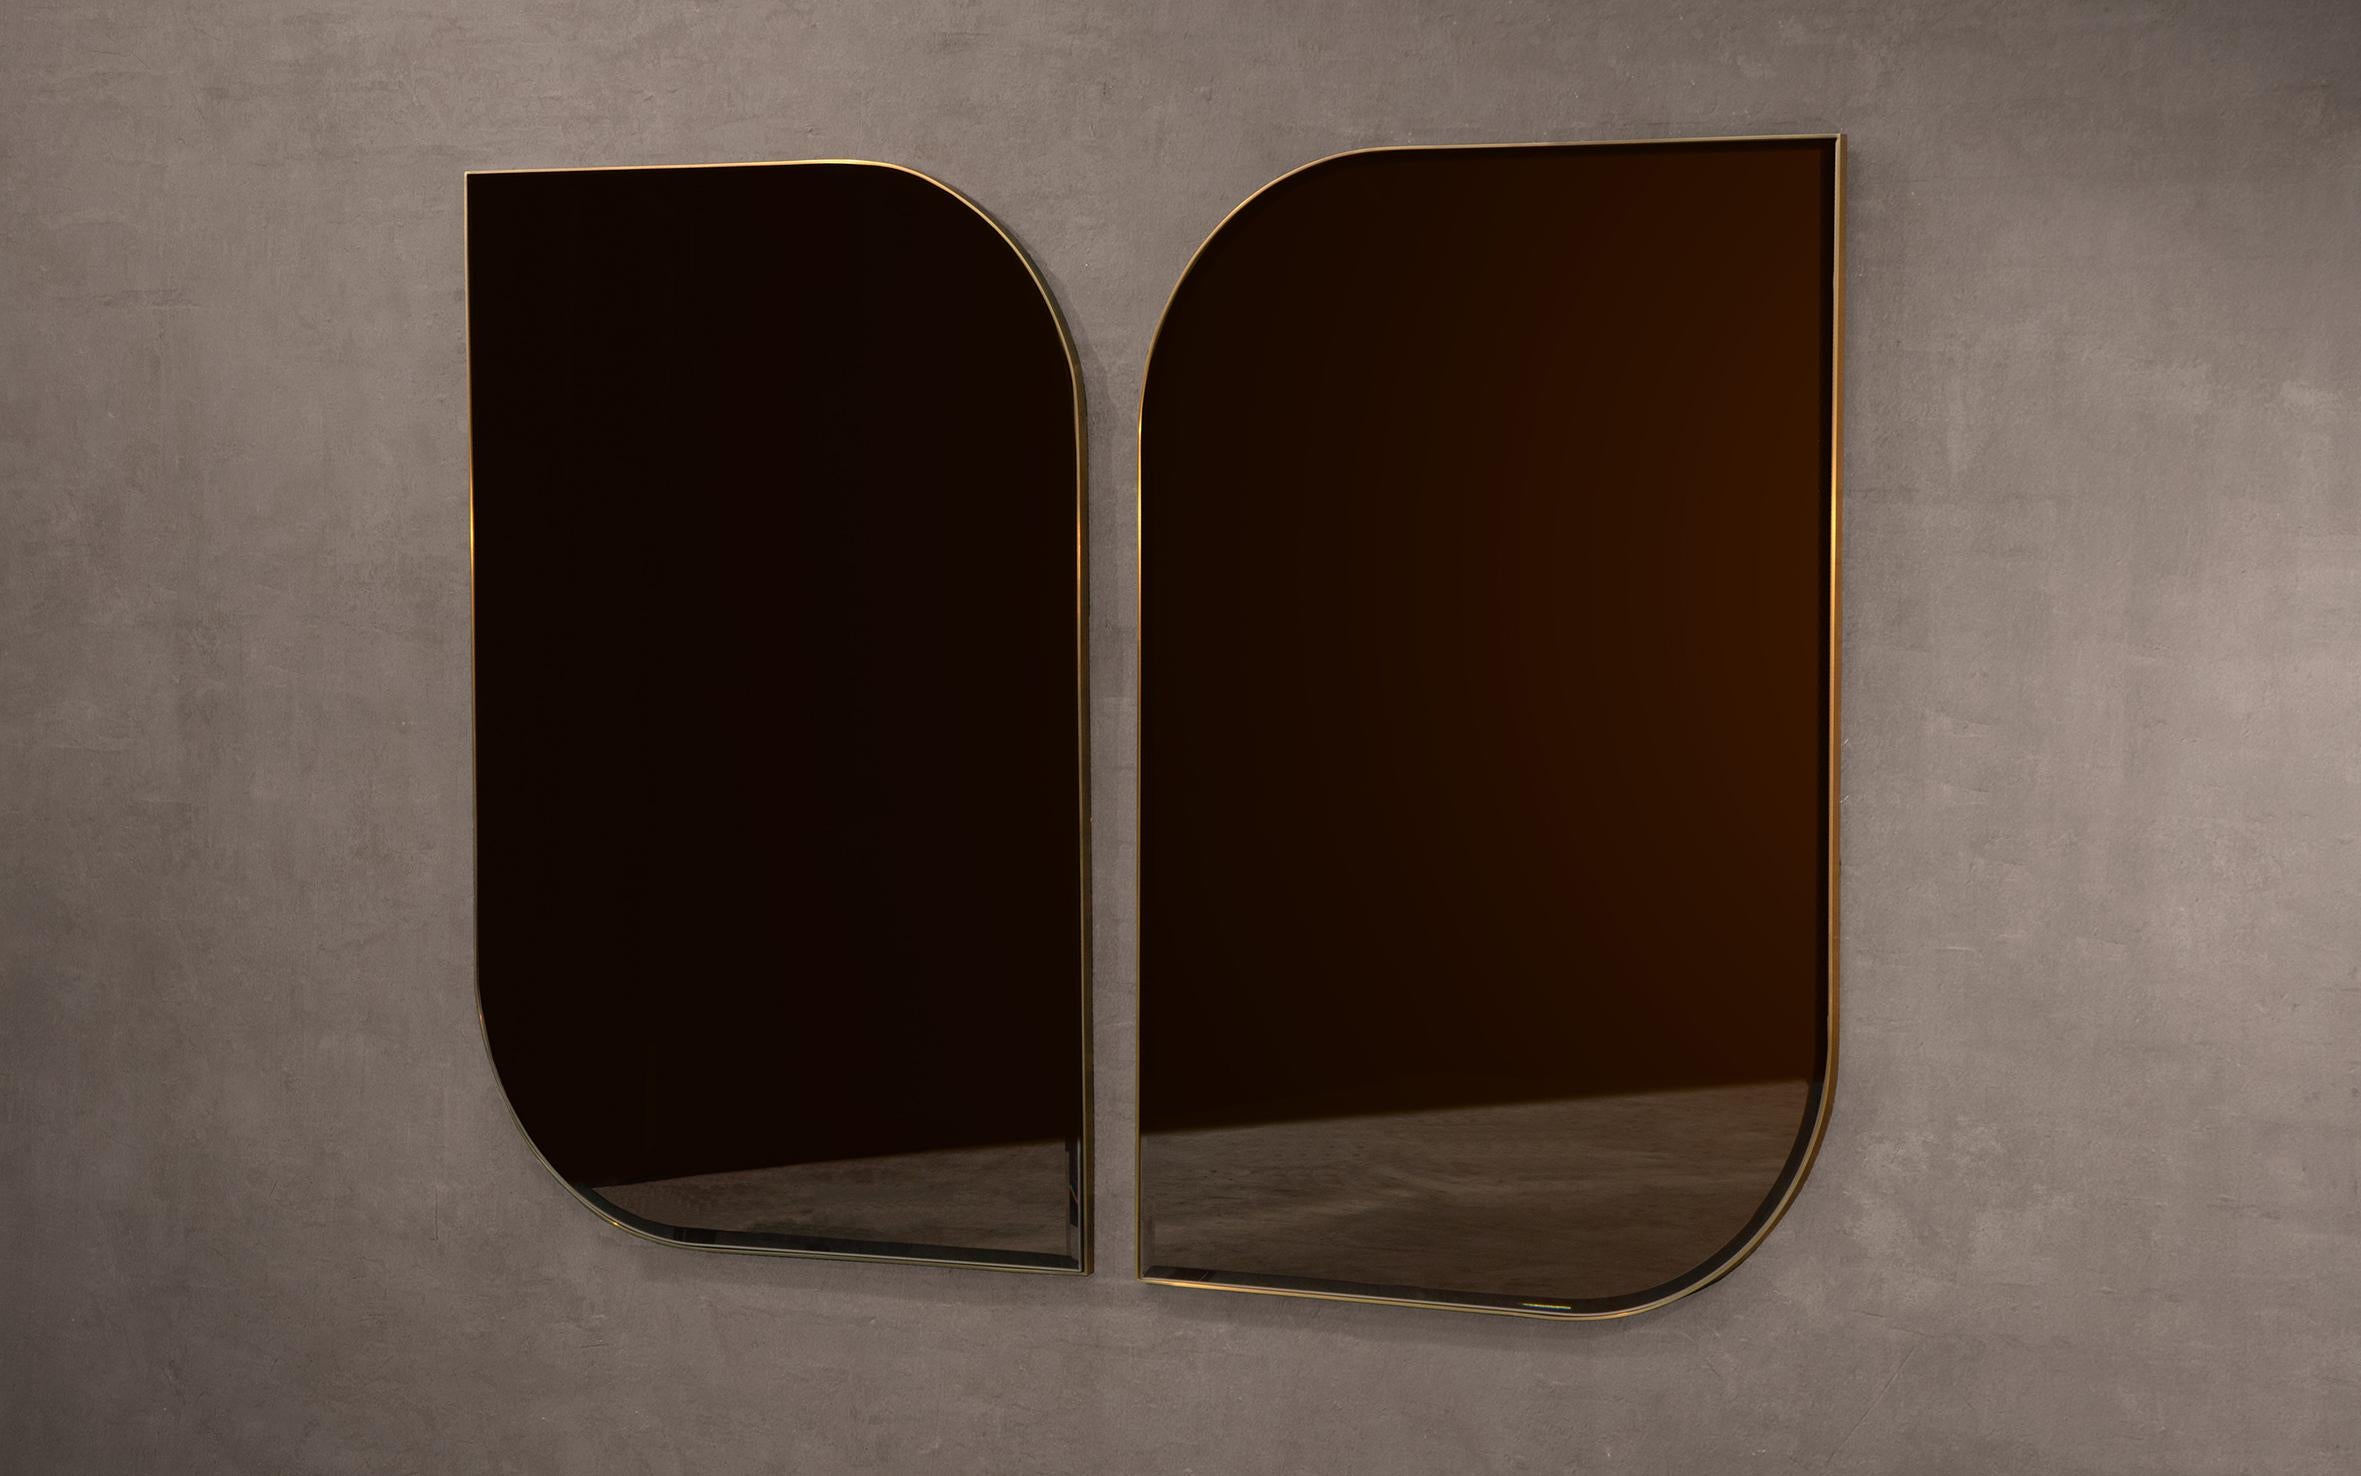 A handcrafted wall mirror in blackened steel and bevelled, bronze tinted glass. Available in left and right handed options for the opportunity of pairing two together.

Can be hung in both portrait and landscape orientations. Supplied with two